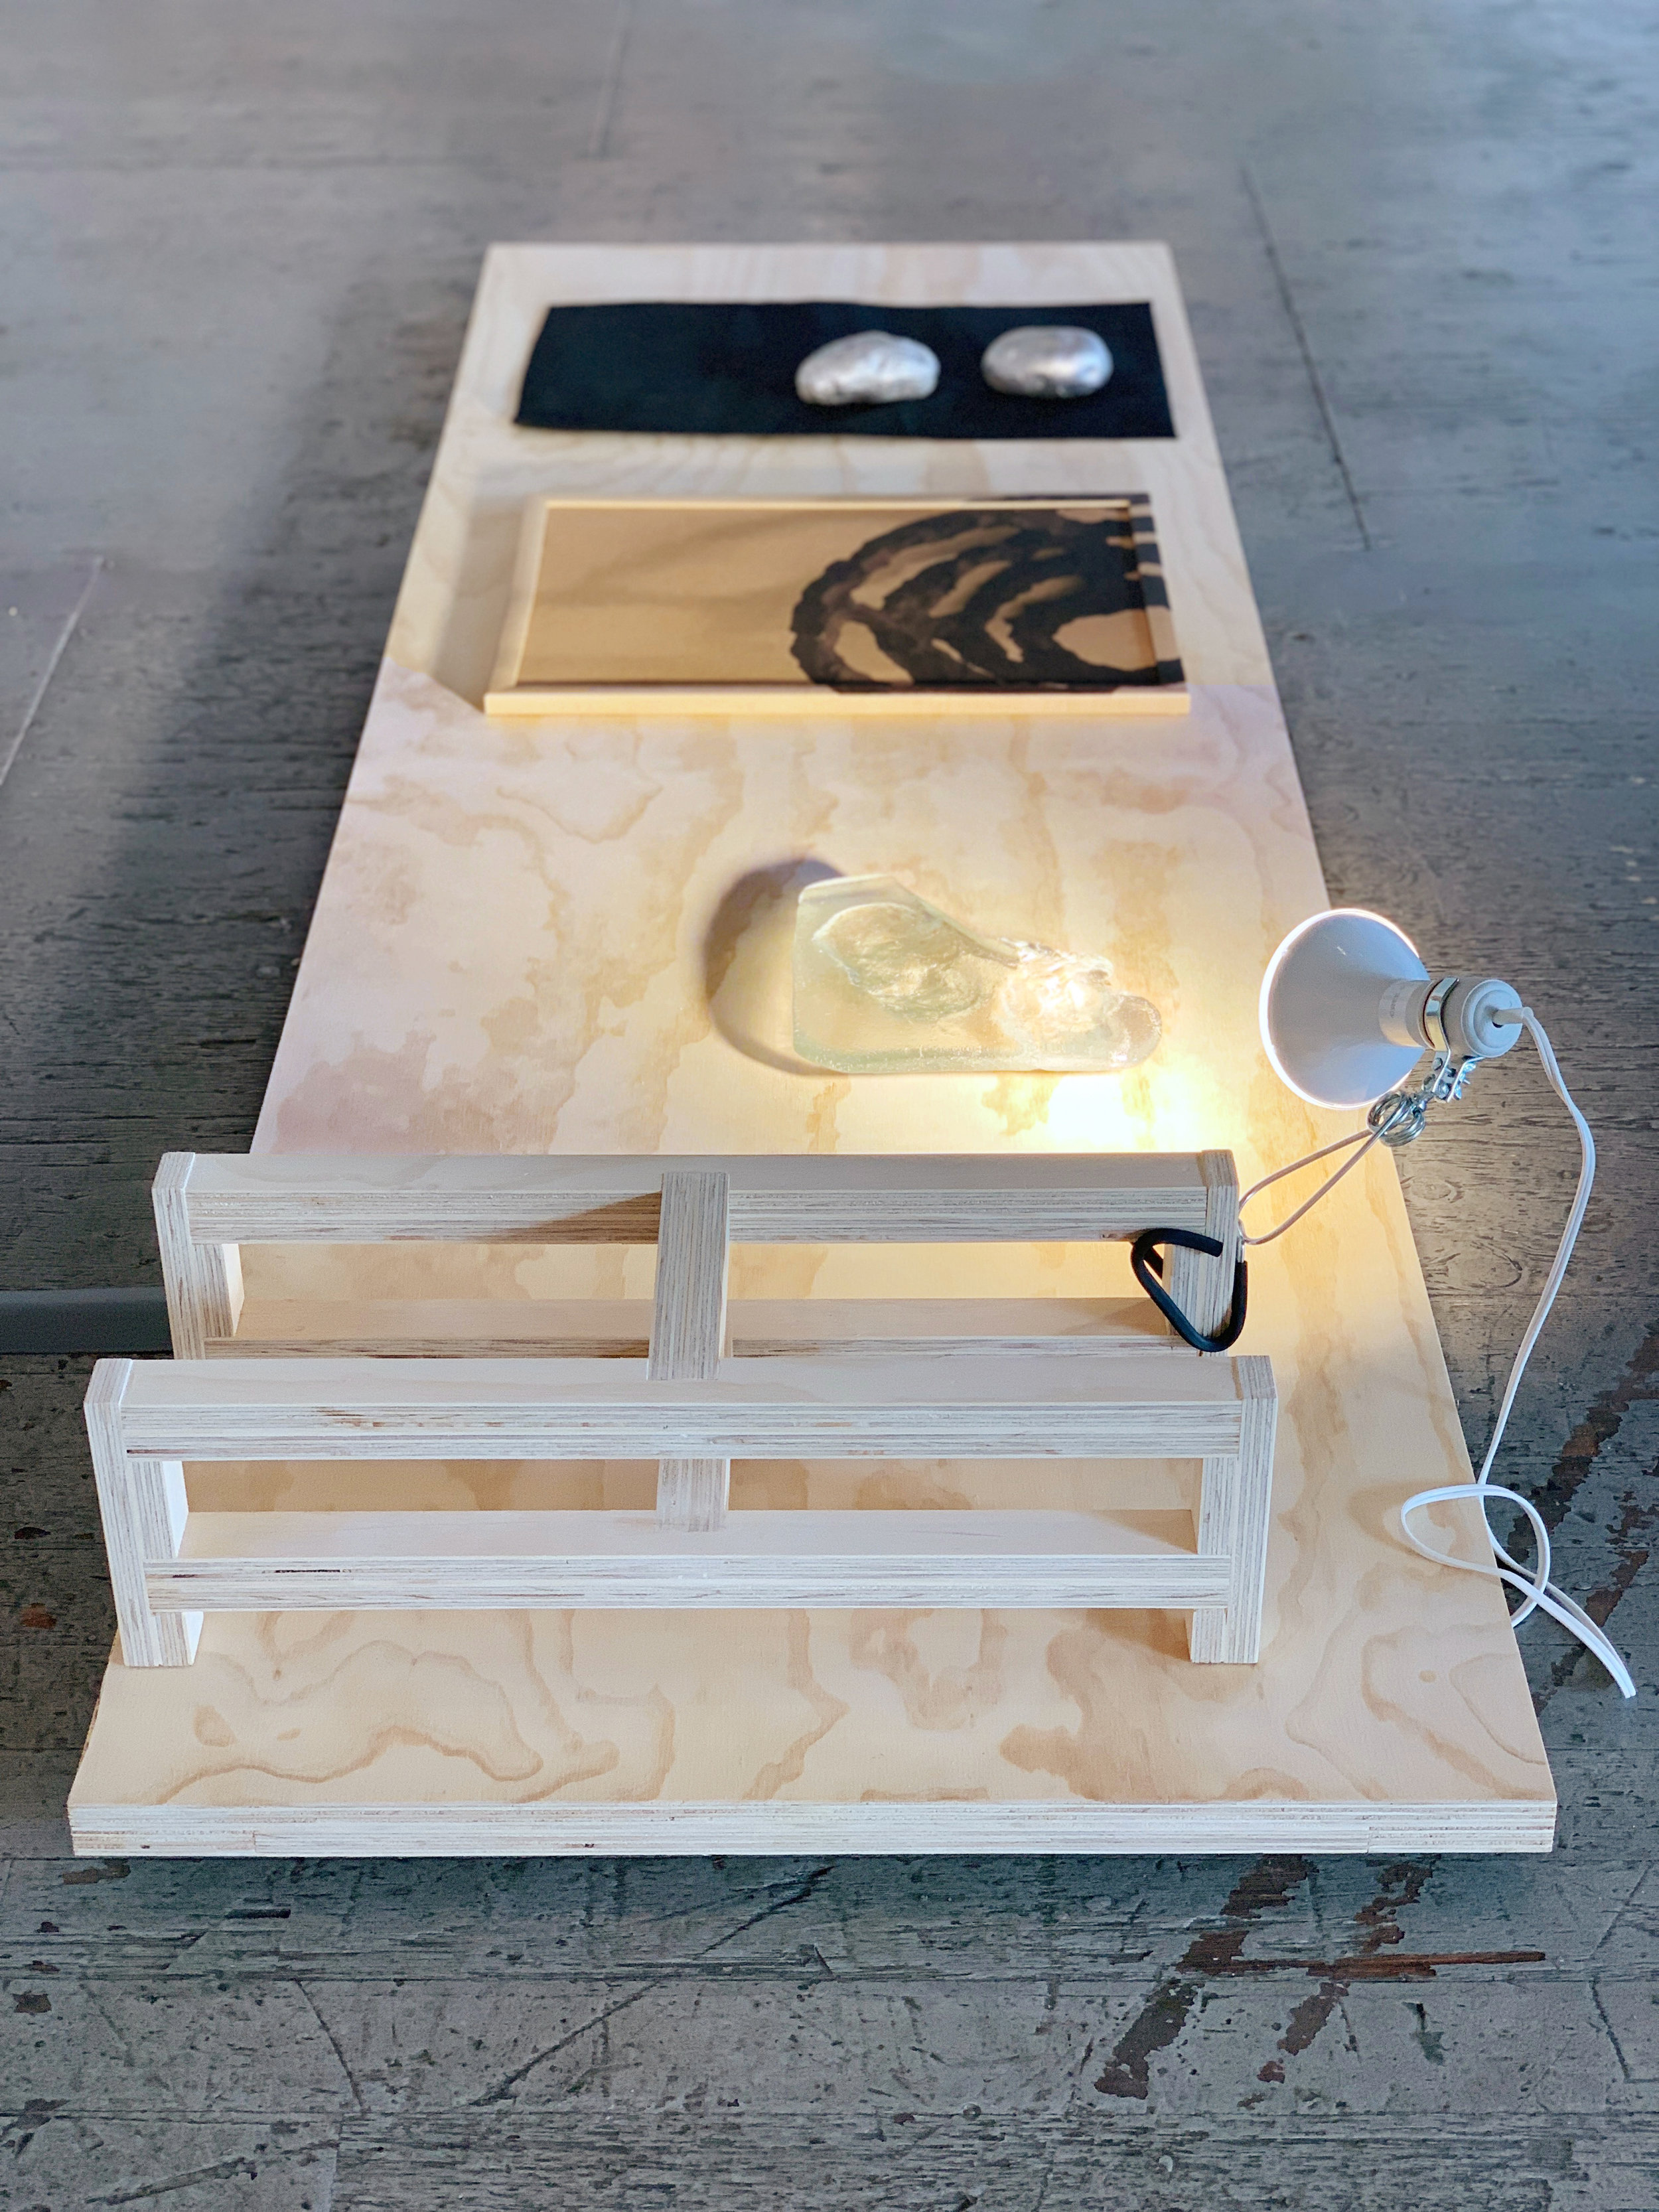   The Burrow , installation view, 2019, porcelain socket clamp light, LED bulb, plywood, sand-cast glass, acrylic on framed cork board, geotextile, cast aluminum, 21 x 38 x 96 inches 